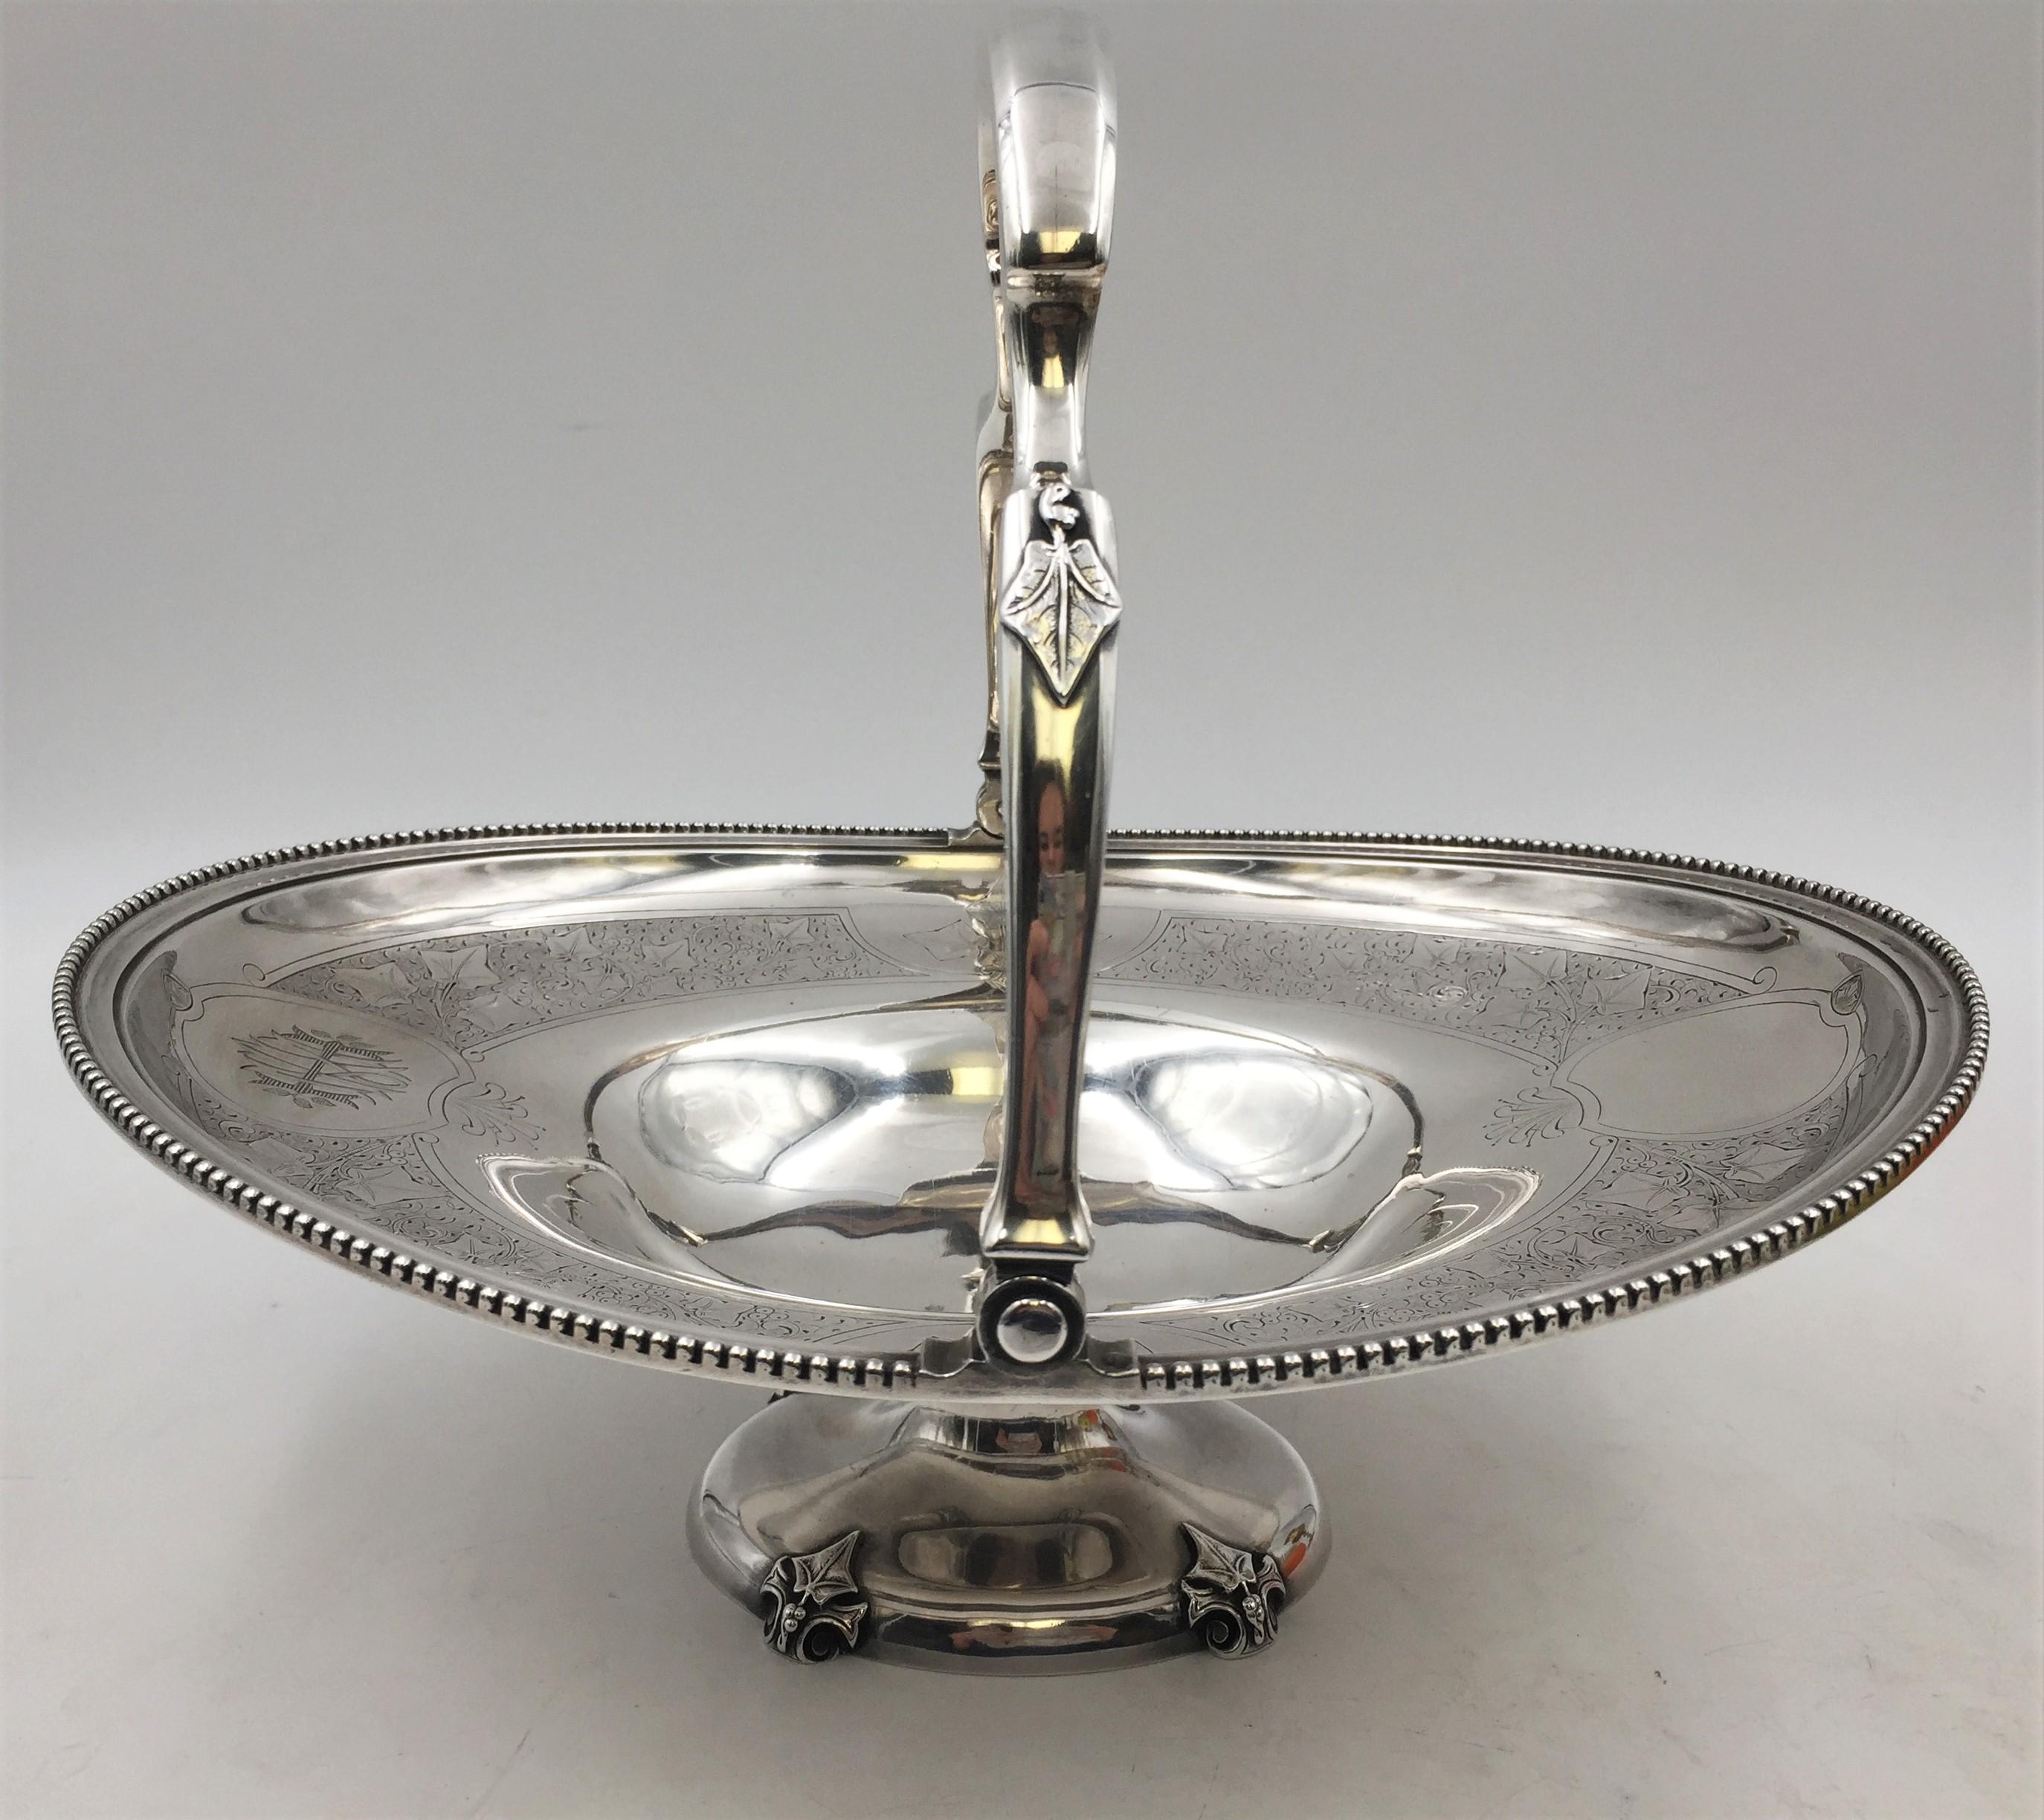 Tiffany & Co. sterling silver basket / centerpiece bowl in pattern number 1721 from the late 1860s with a beaded rim, a handle and base with applied leaves, and engraved vegetal and twirling motifs near the rim. It measures 10'' in height with the